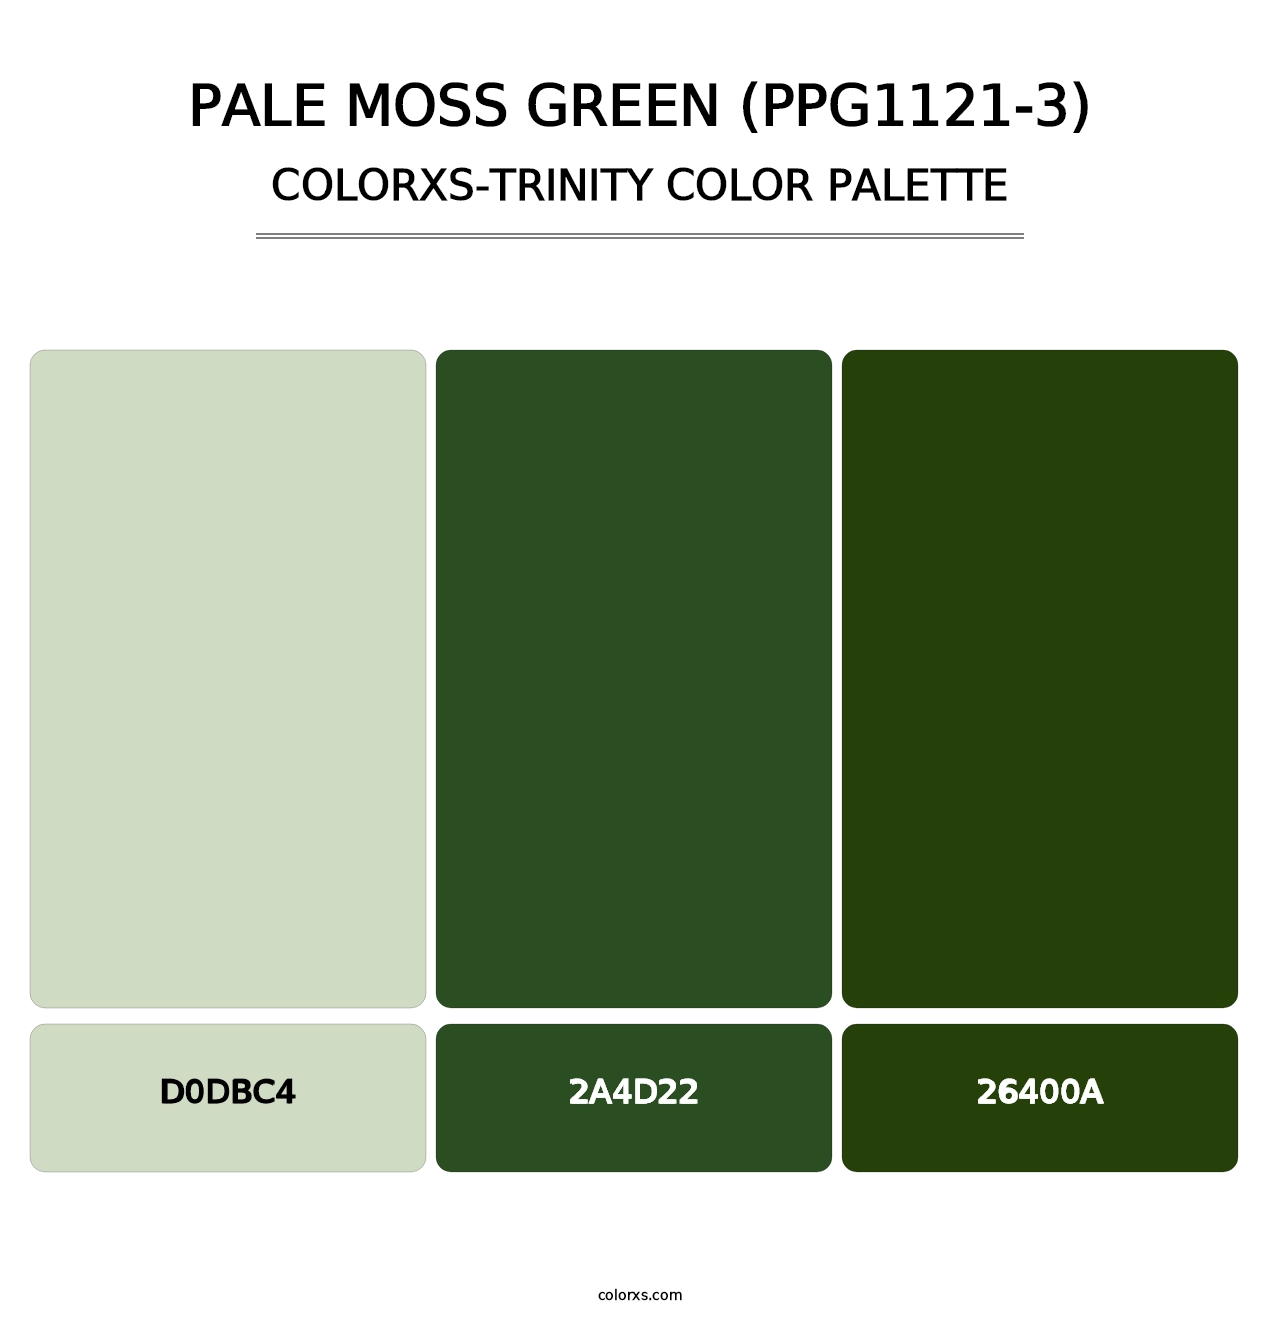 Pale Moss Green (PPG1121-3) - Colorxs Trinity Palette